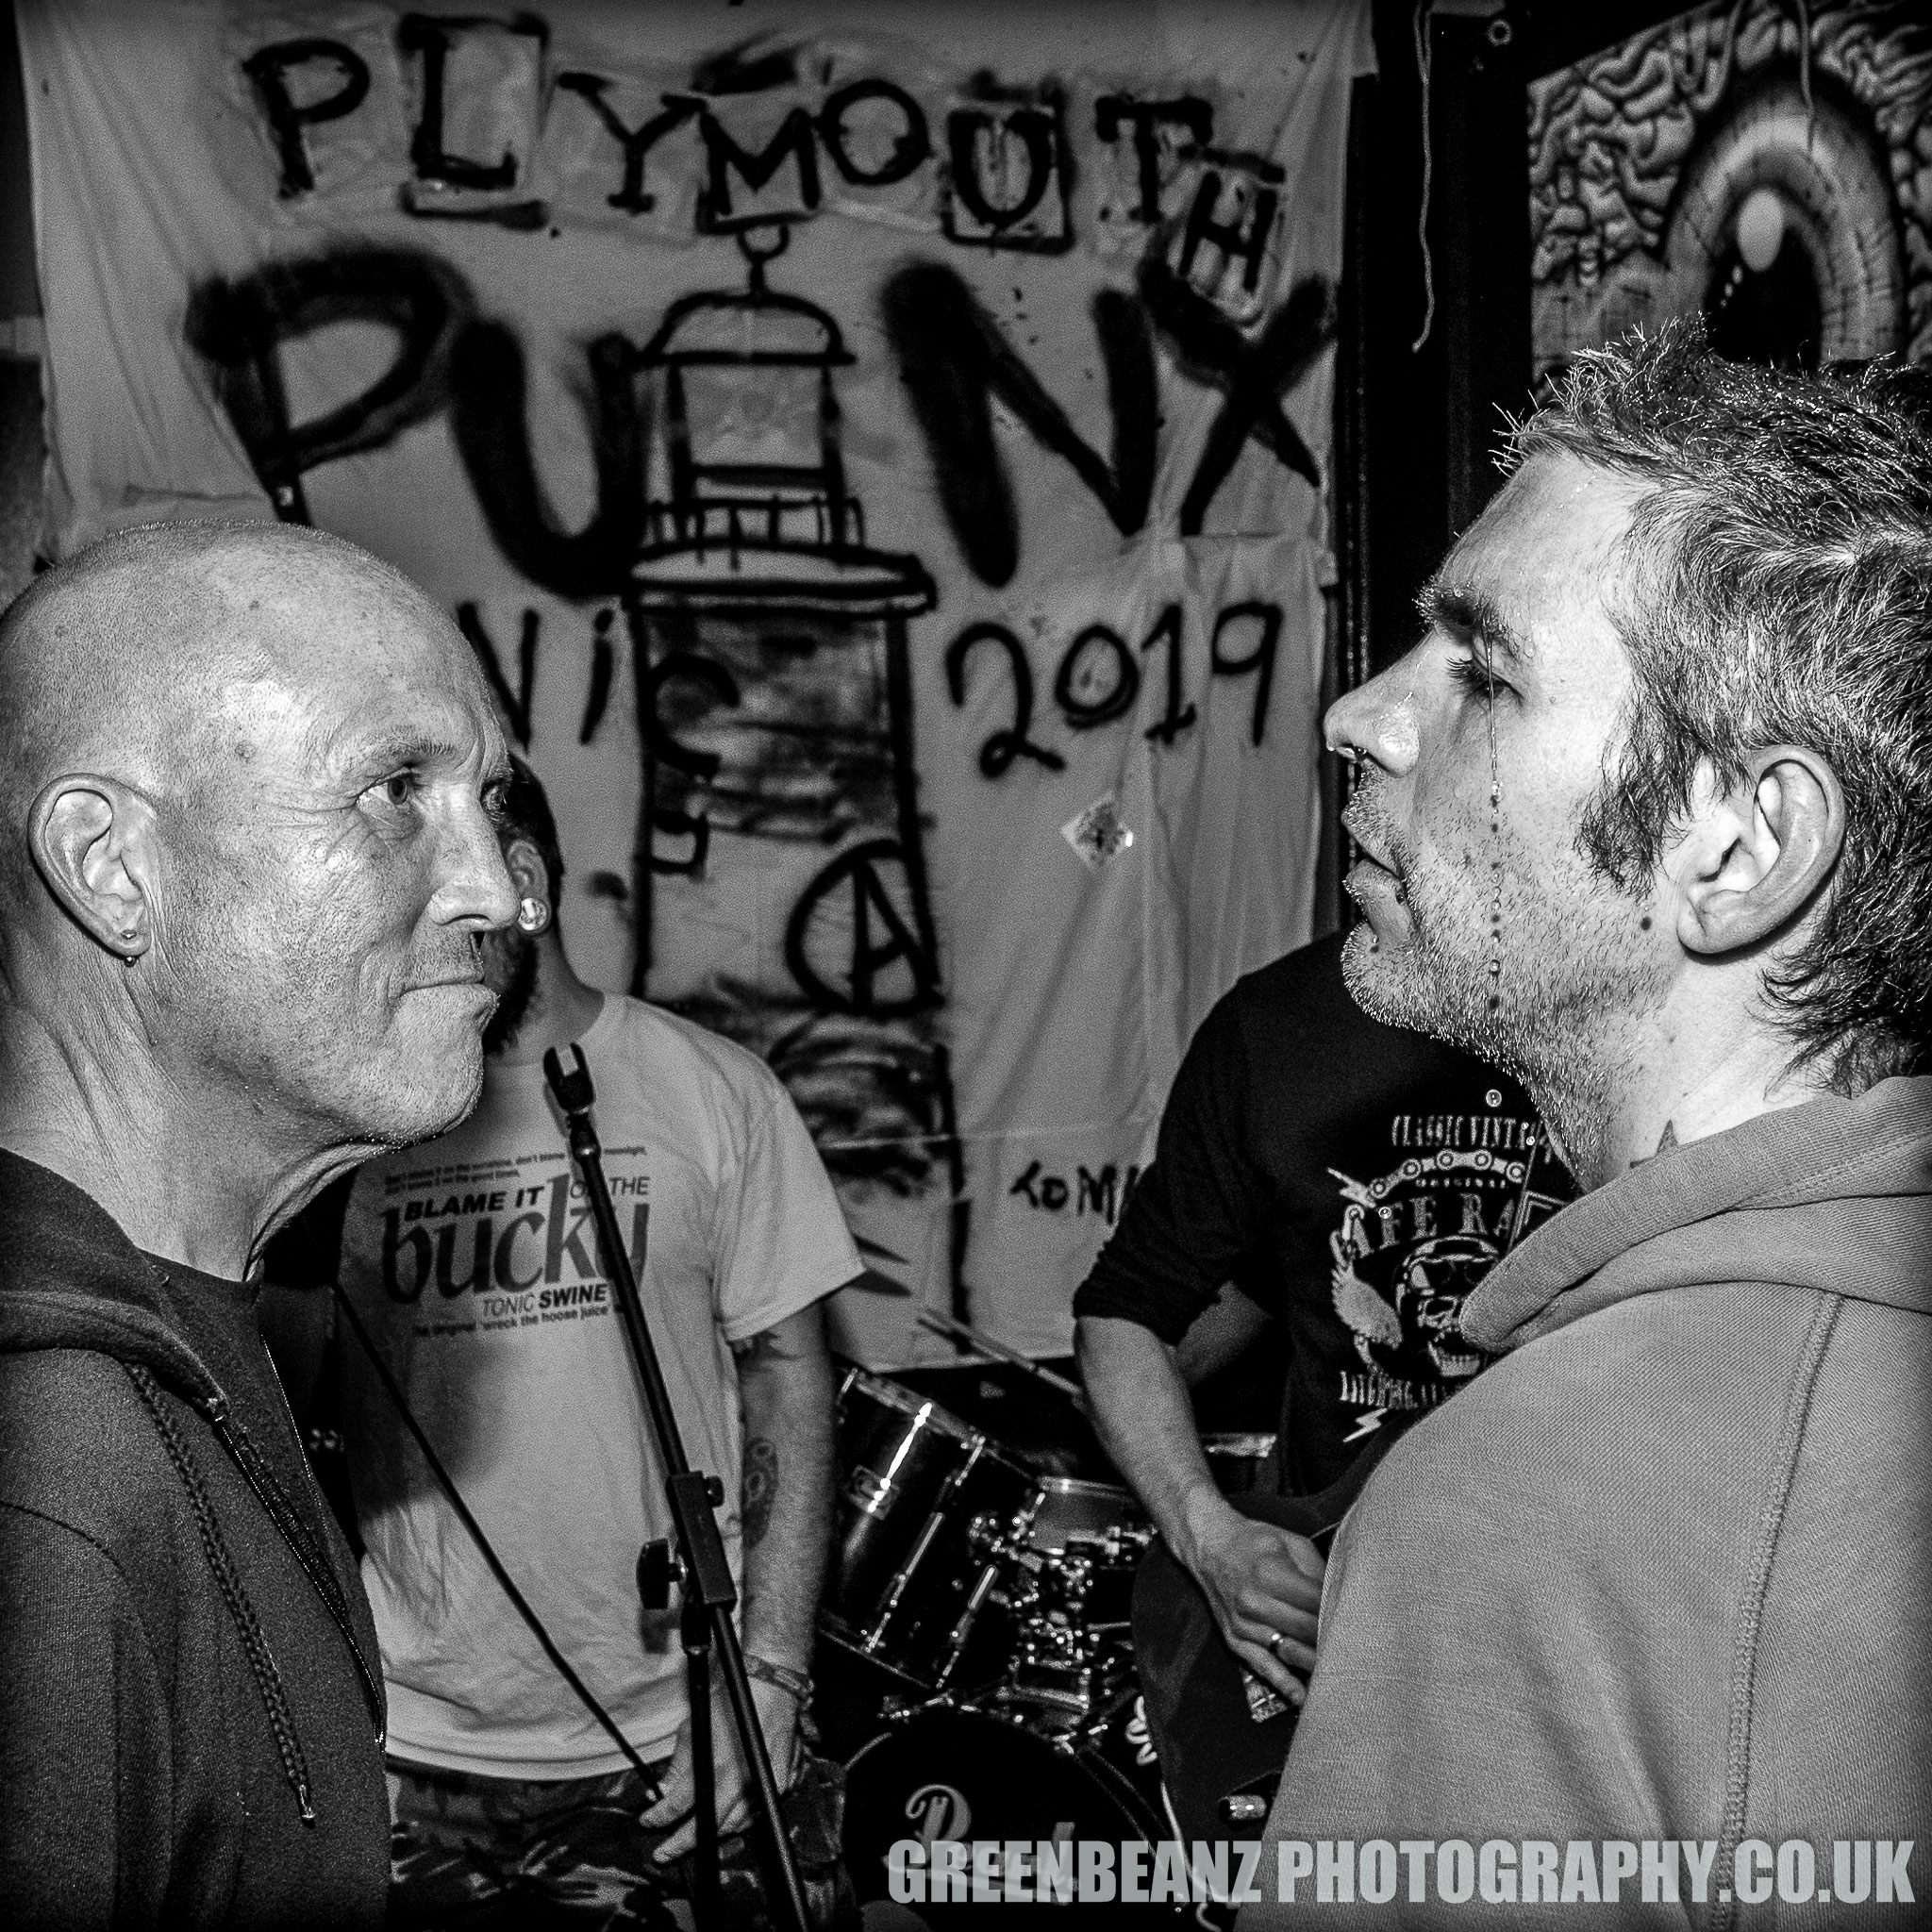 Plymouth Punks Picnic Fans at the Pit and Pendulum in 2019